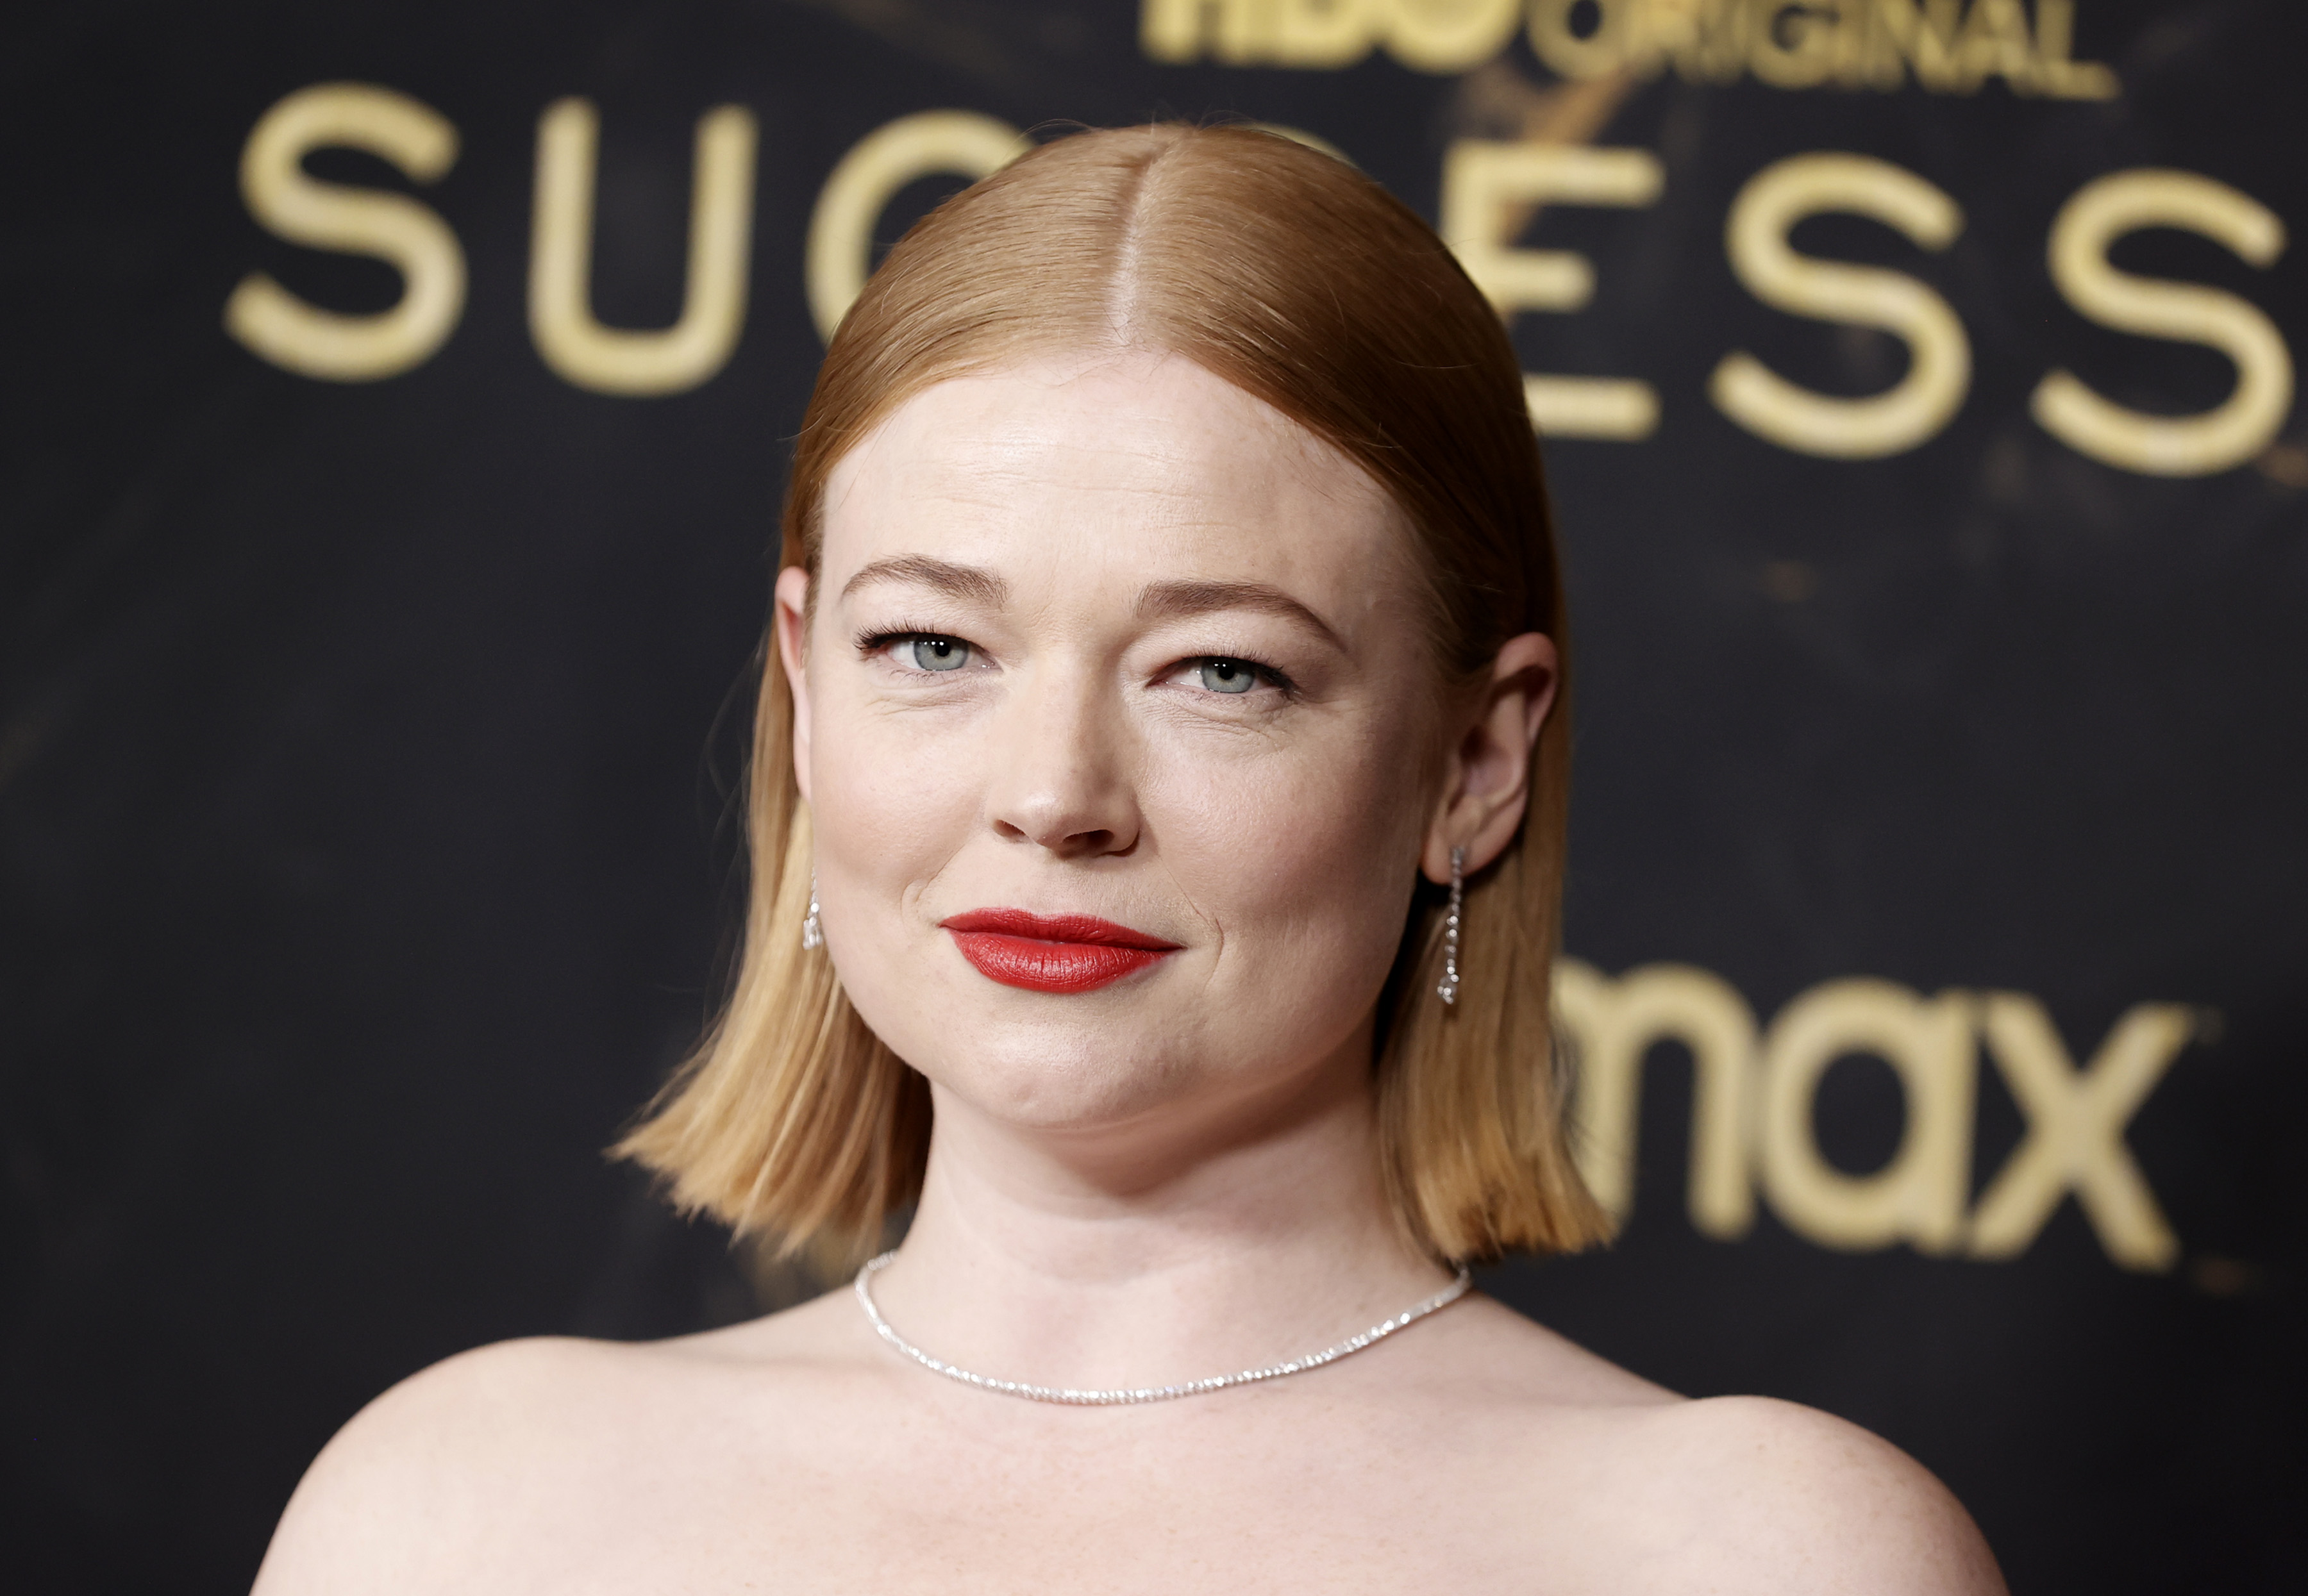 Sarah Snook attends the HBO’s “Succession” Season 3 Premiere at American Museum of Natural History on October 12, 2021 in New York City.